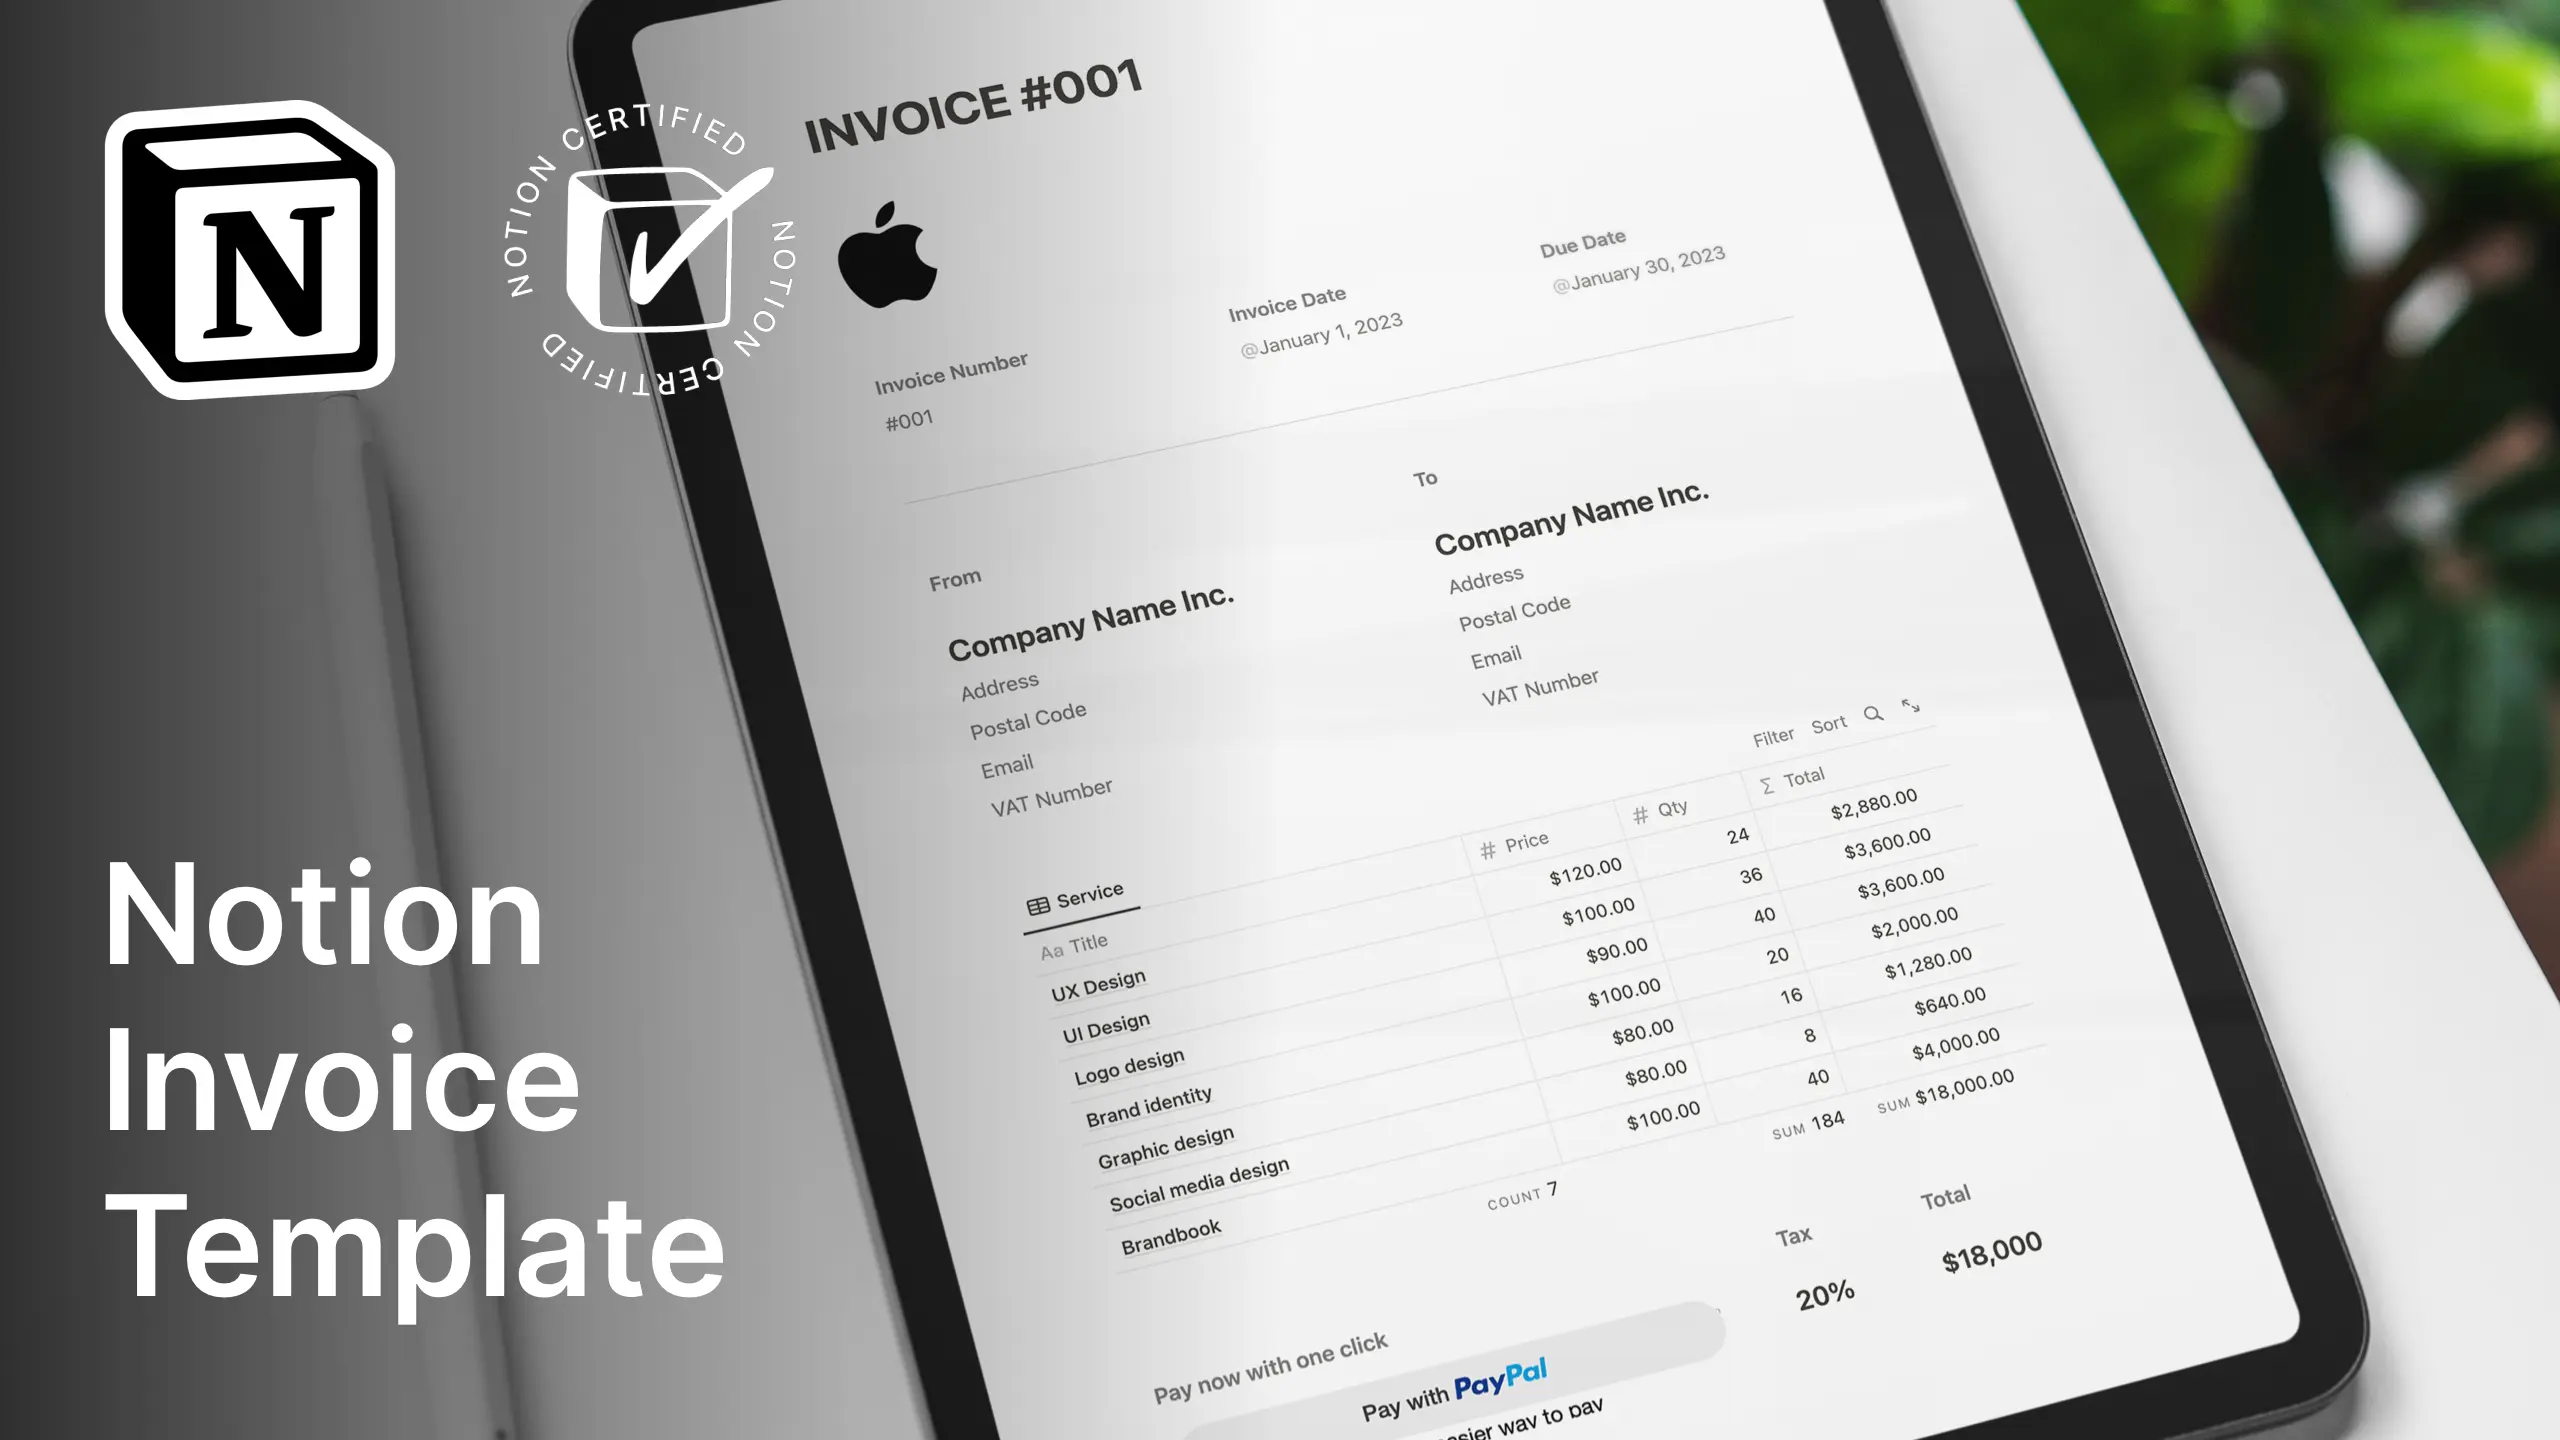 Notion Invoice Template For Free image